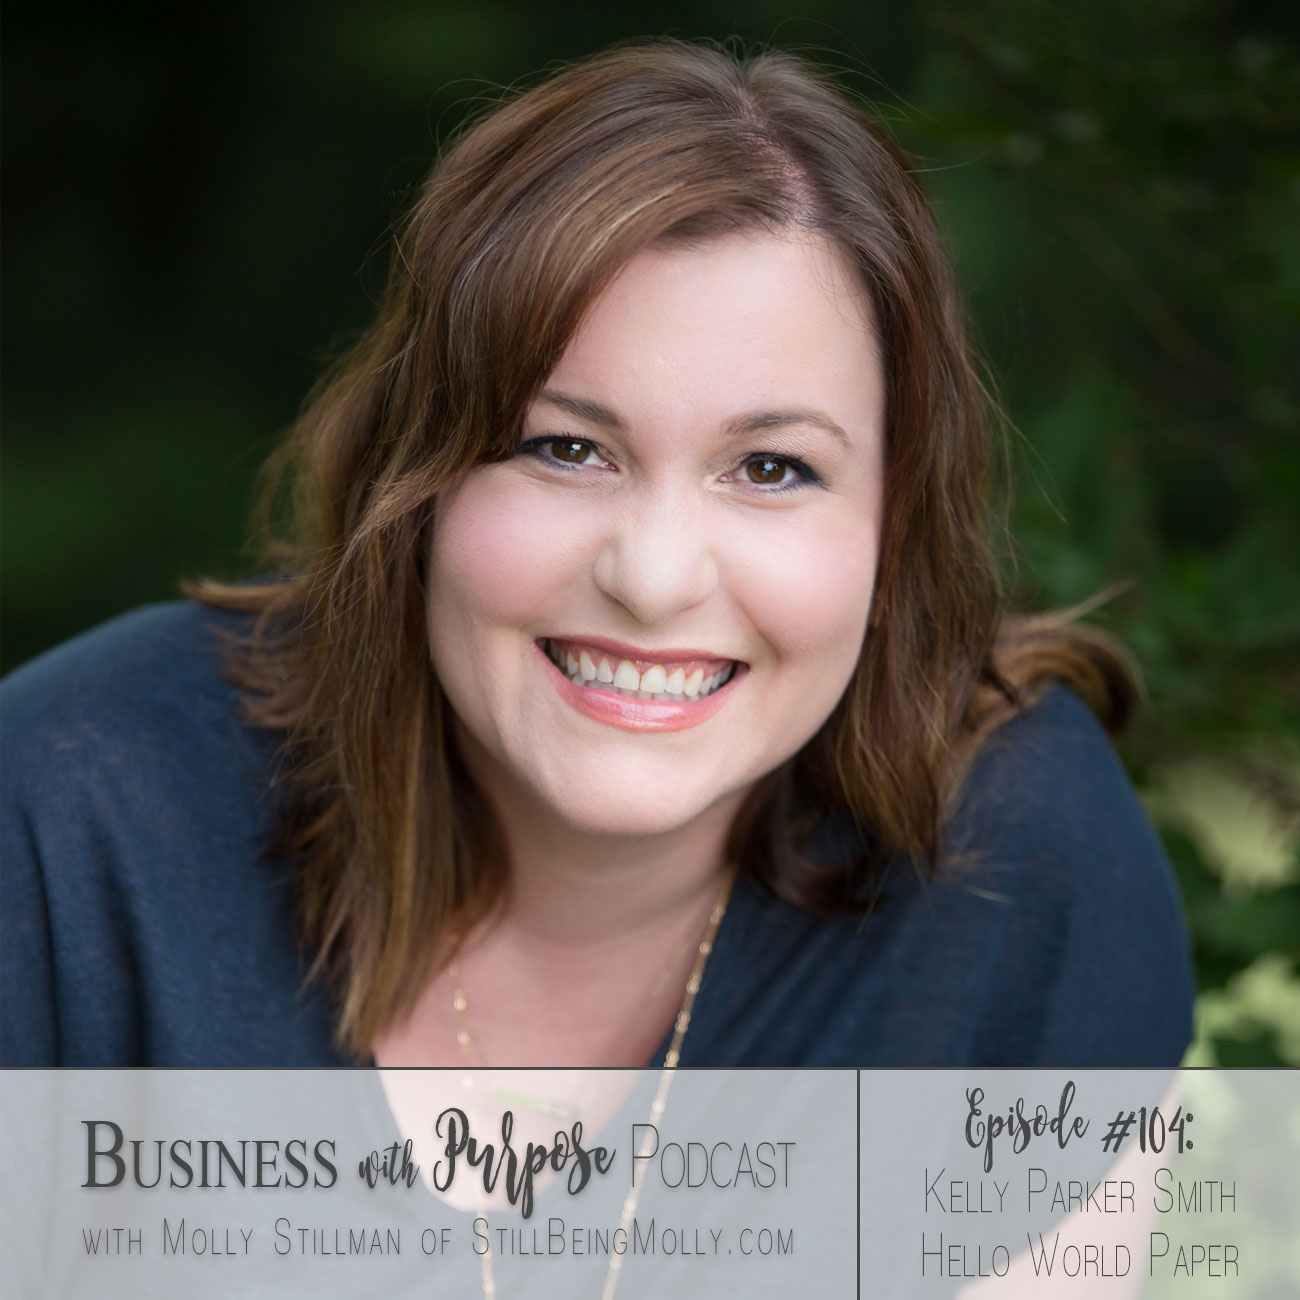 Business with Purpose Podcast EP 104: Kelly Parker Smith, Hello World Paper